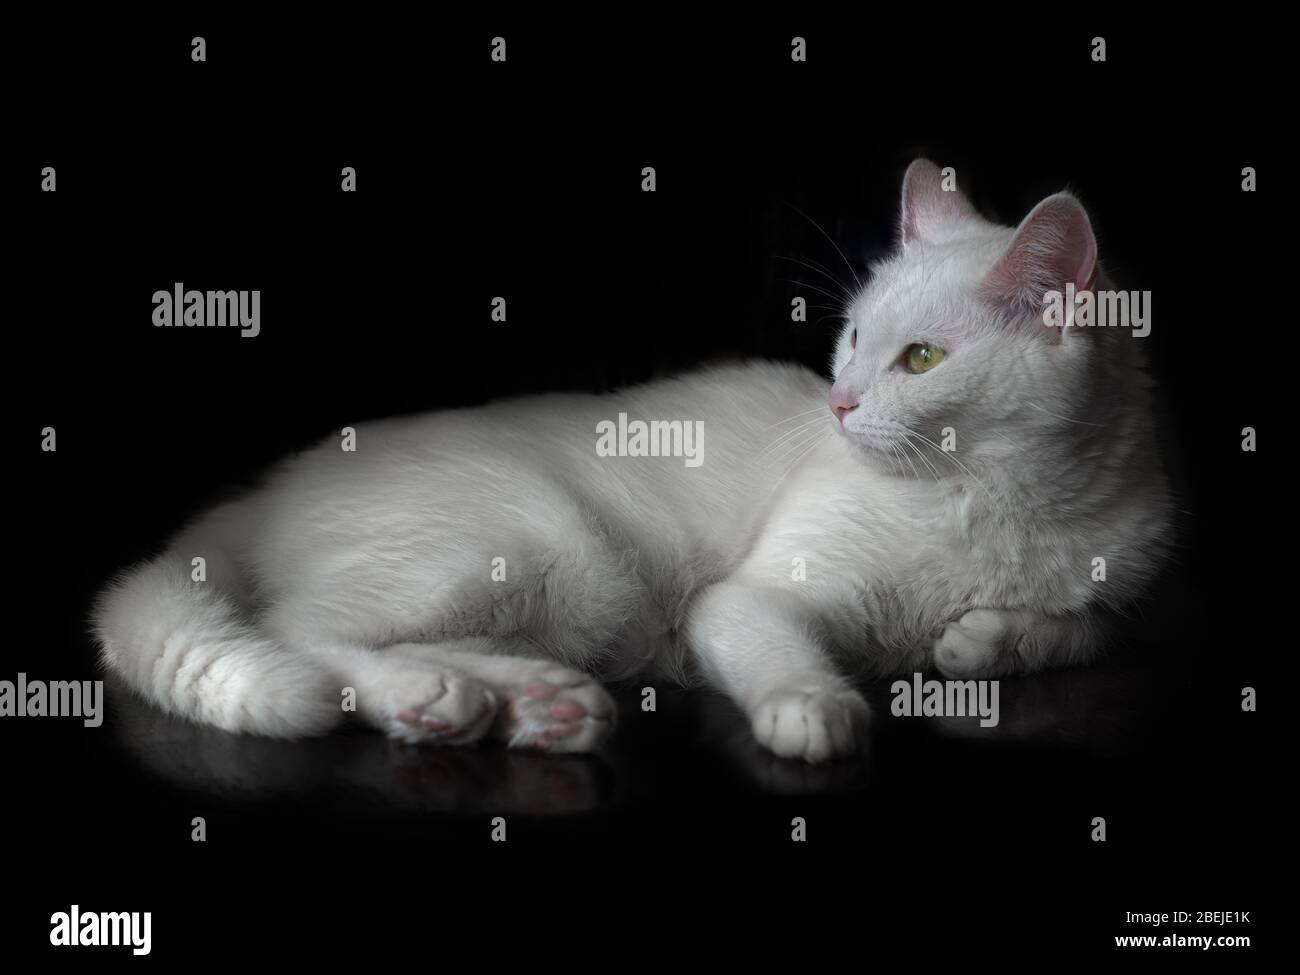 Sitting white cat with green eyes, on isolated black background with reflection, looking away. Stock Photo